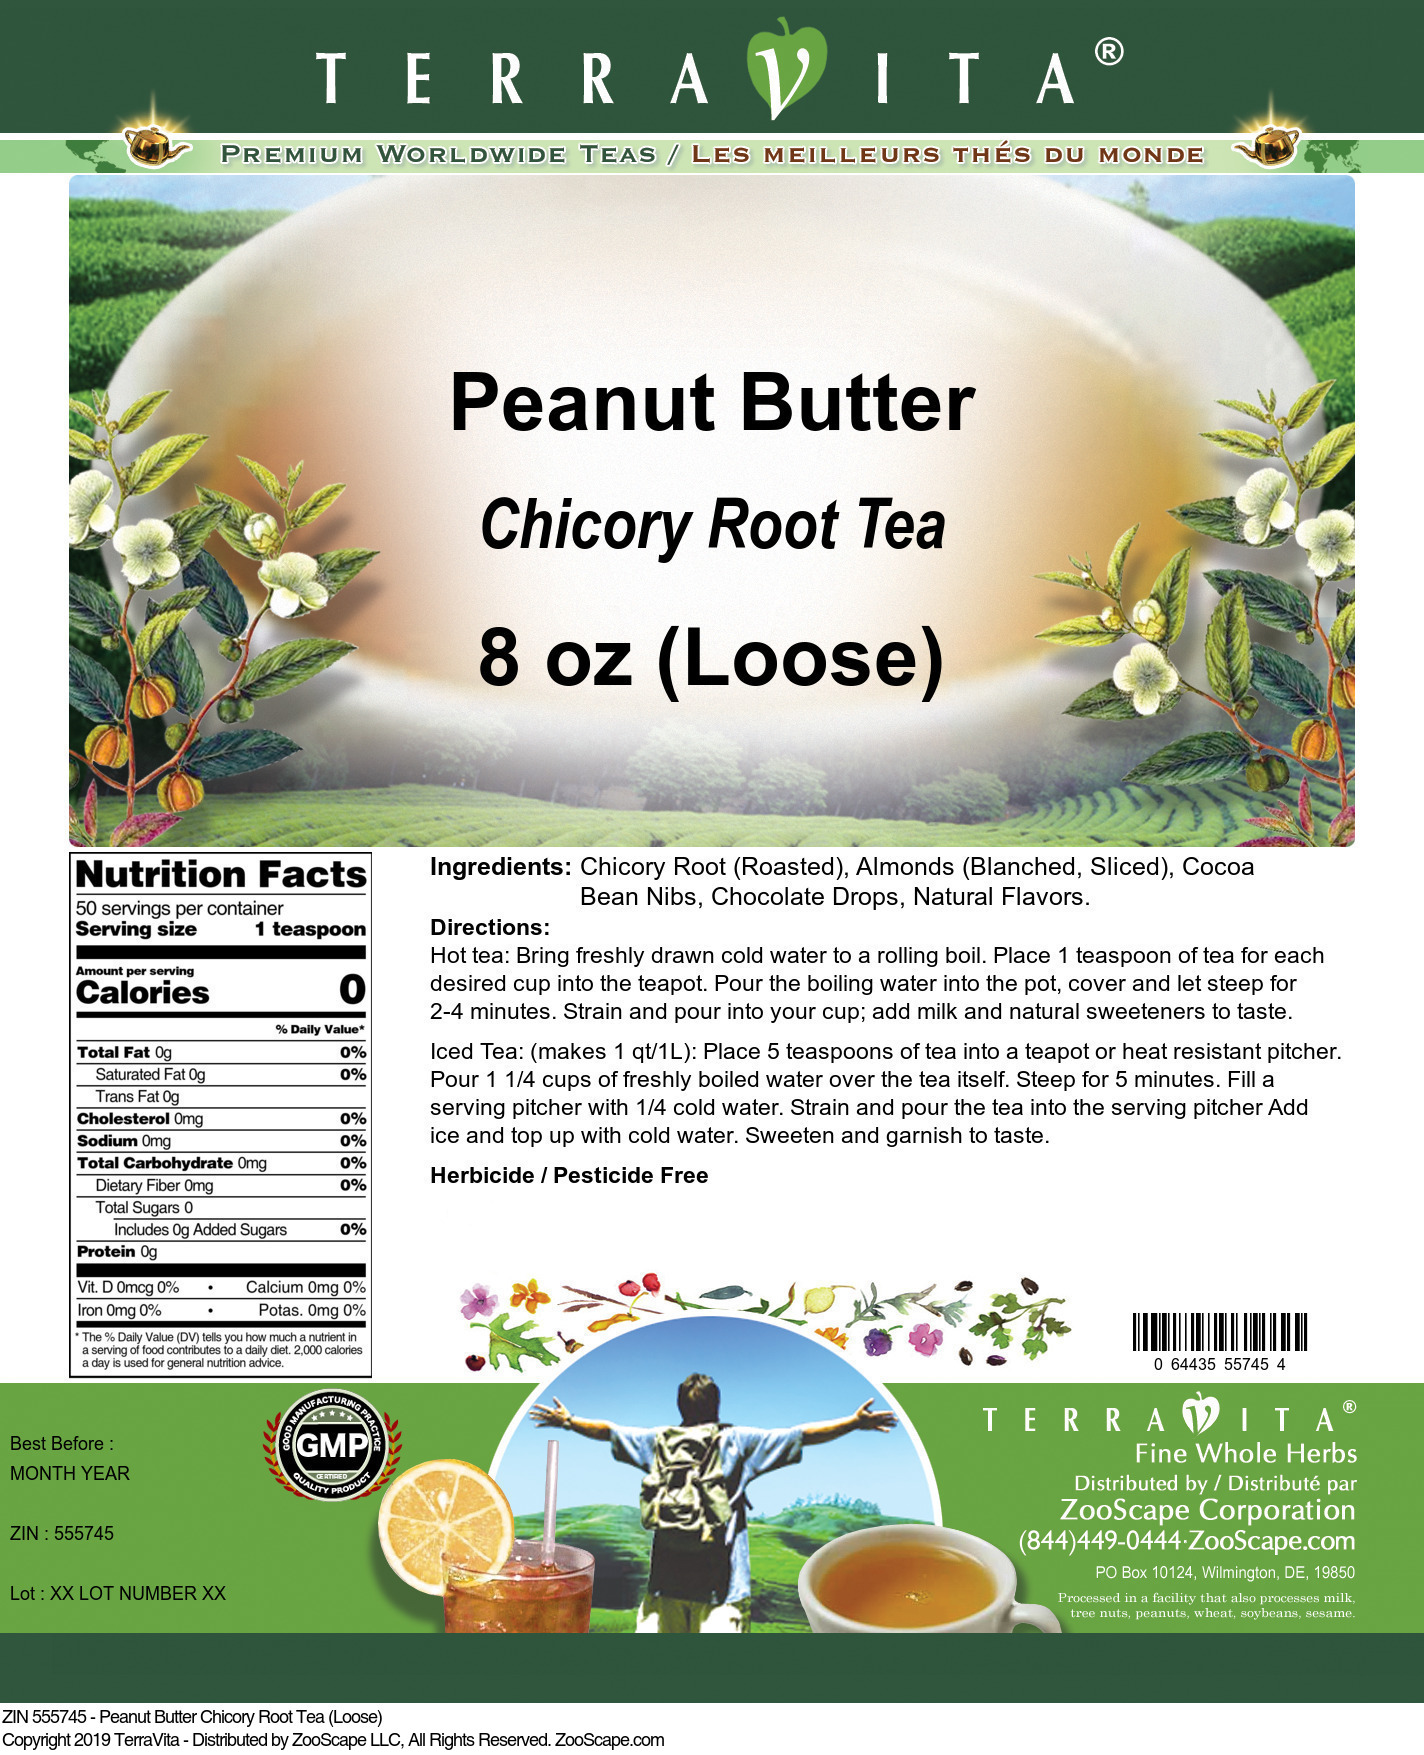 Peanut Butter Chicory Root Tea (Loose) - Label